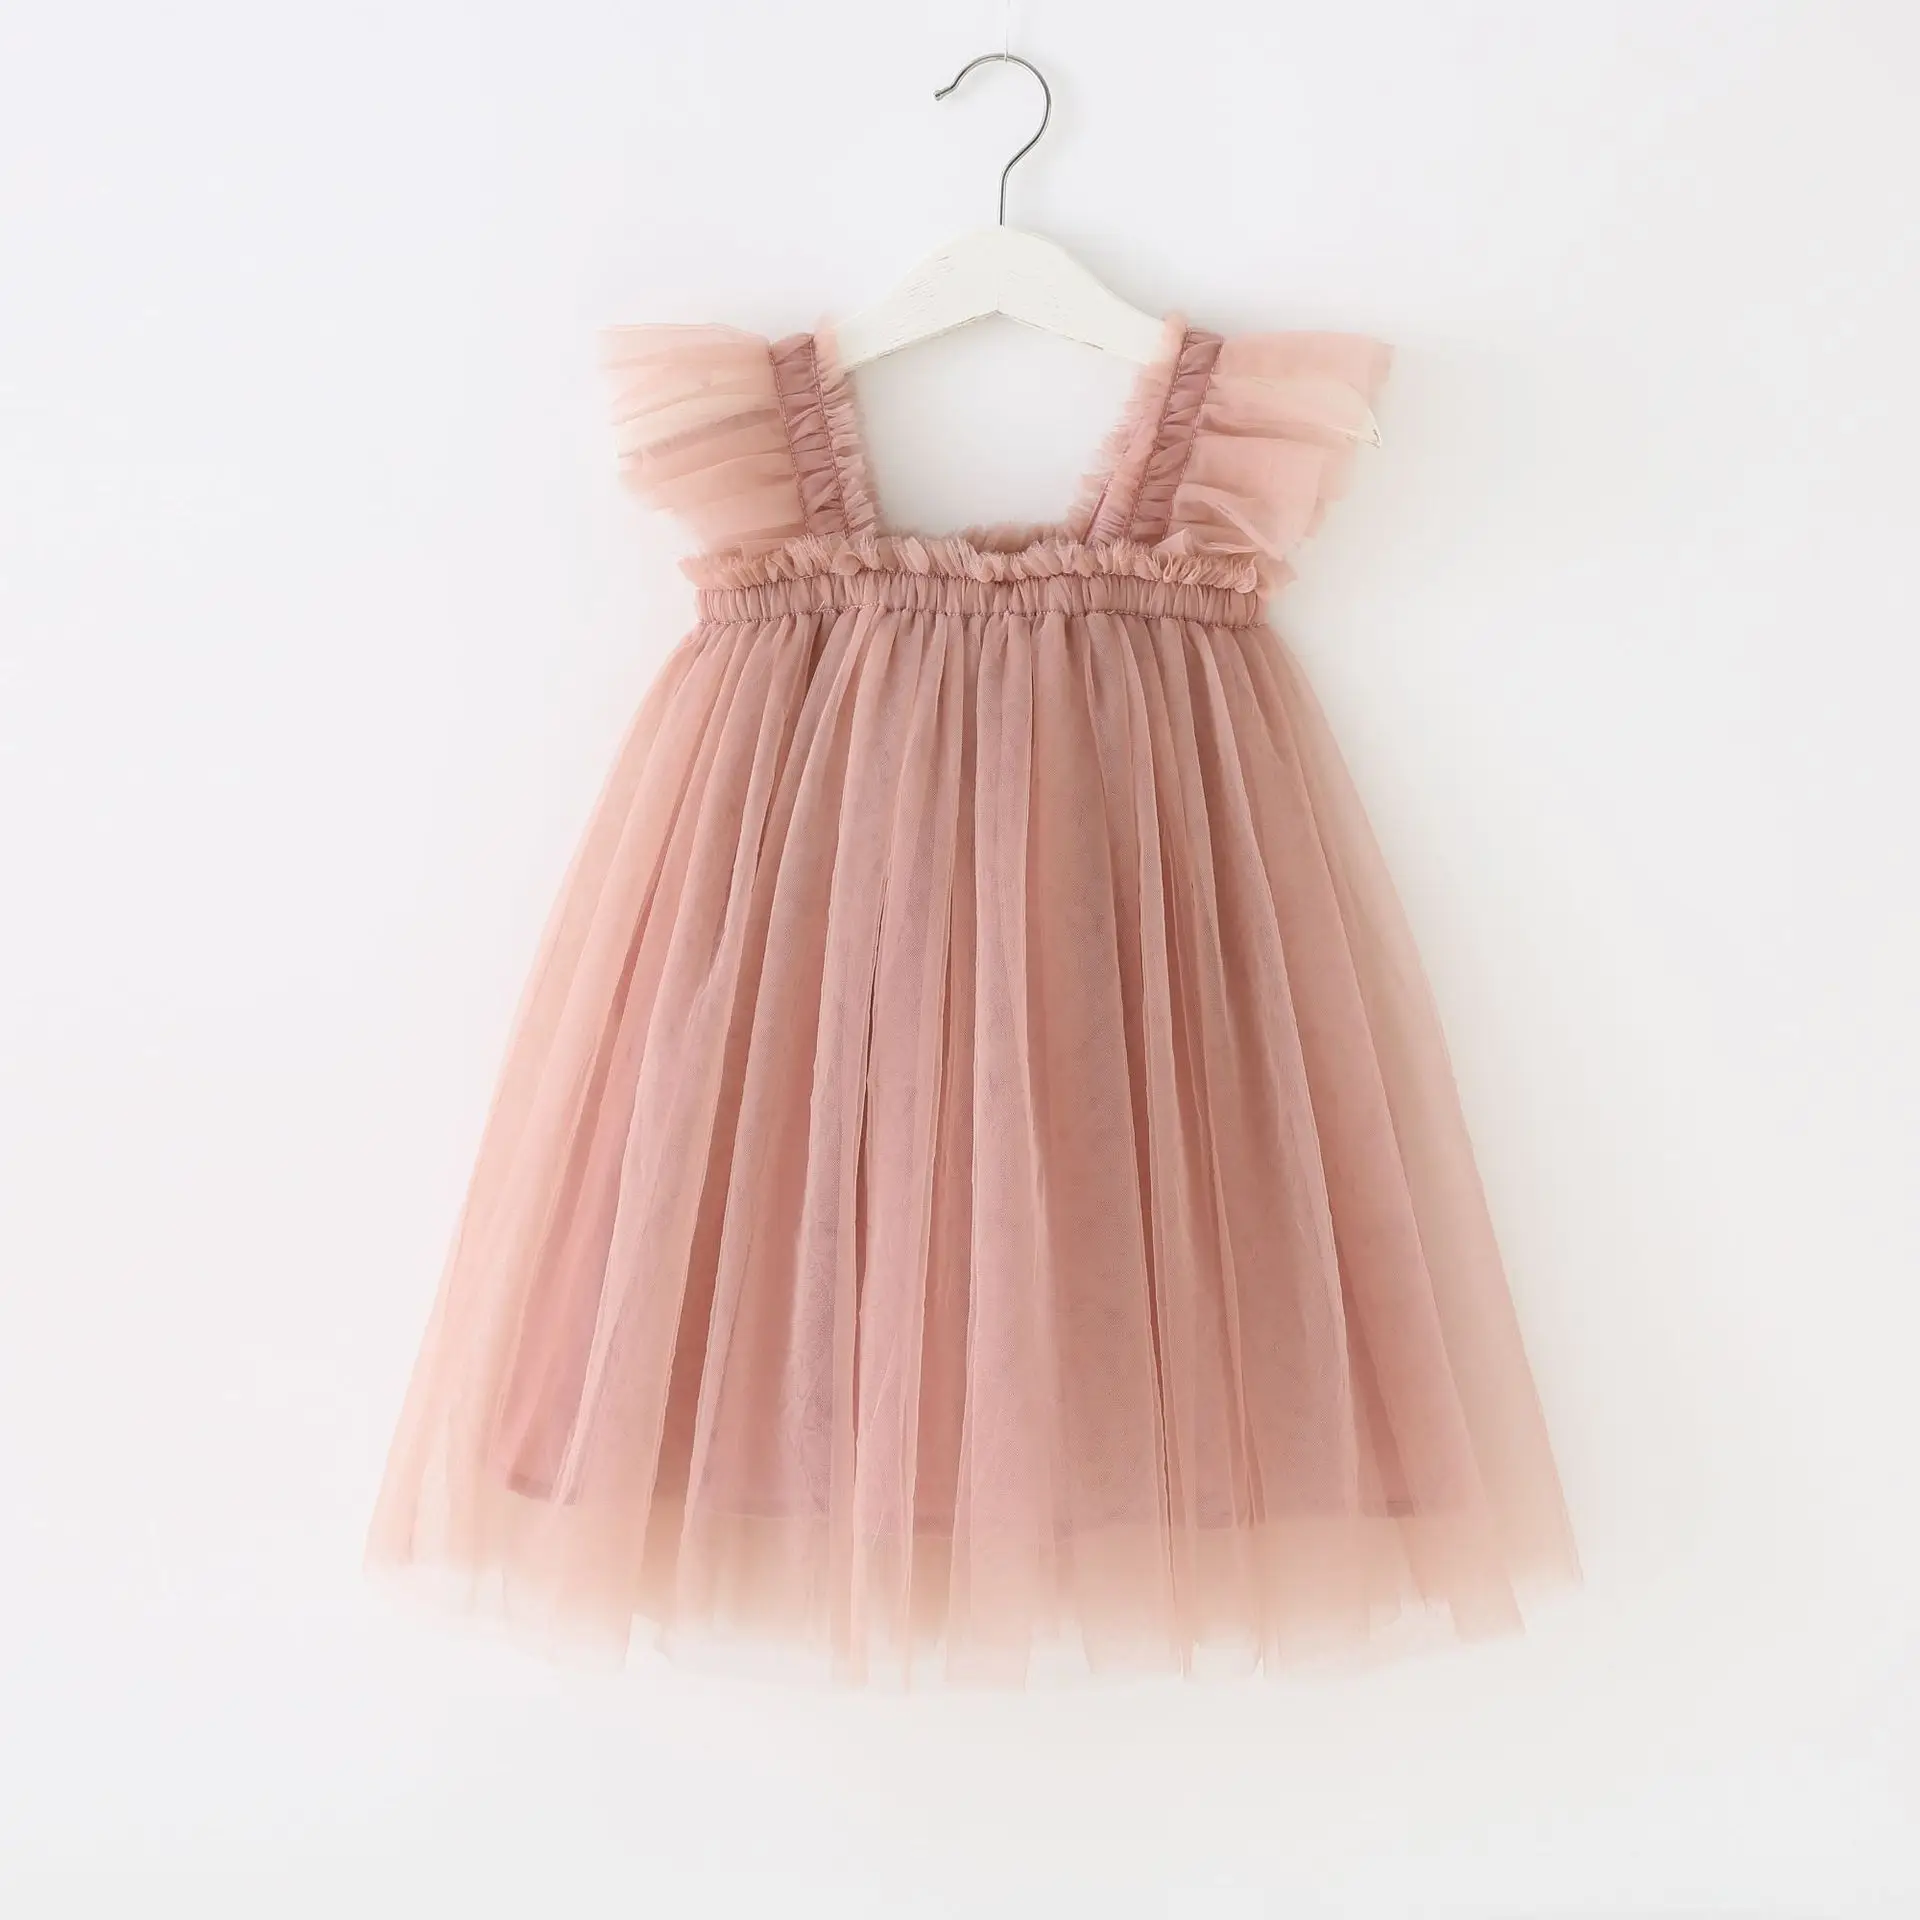 2023 Girls Flutter Sleeve Dress Casual Costumes for Toddlers Girls Luxury Girl Children's Party Candy Color Tutu Fairy Dress enlarge